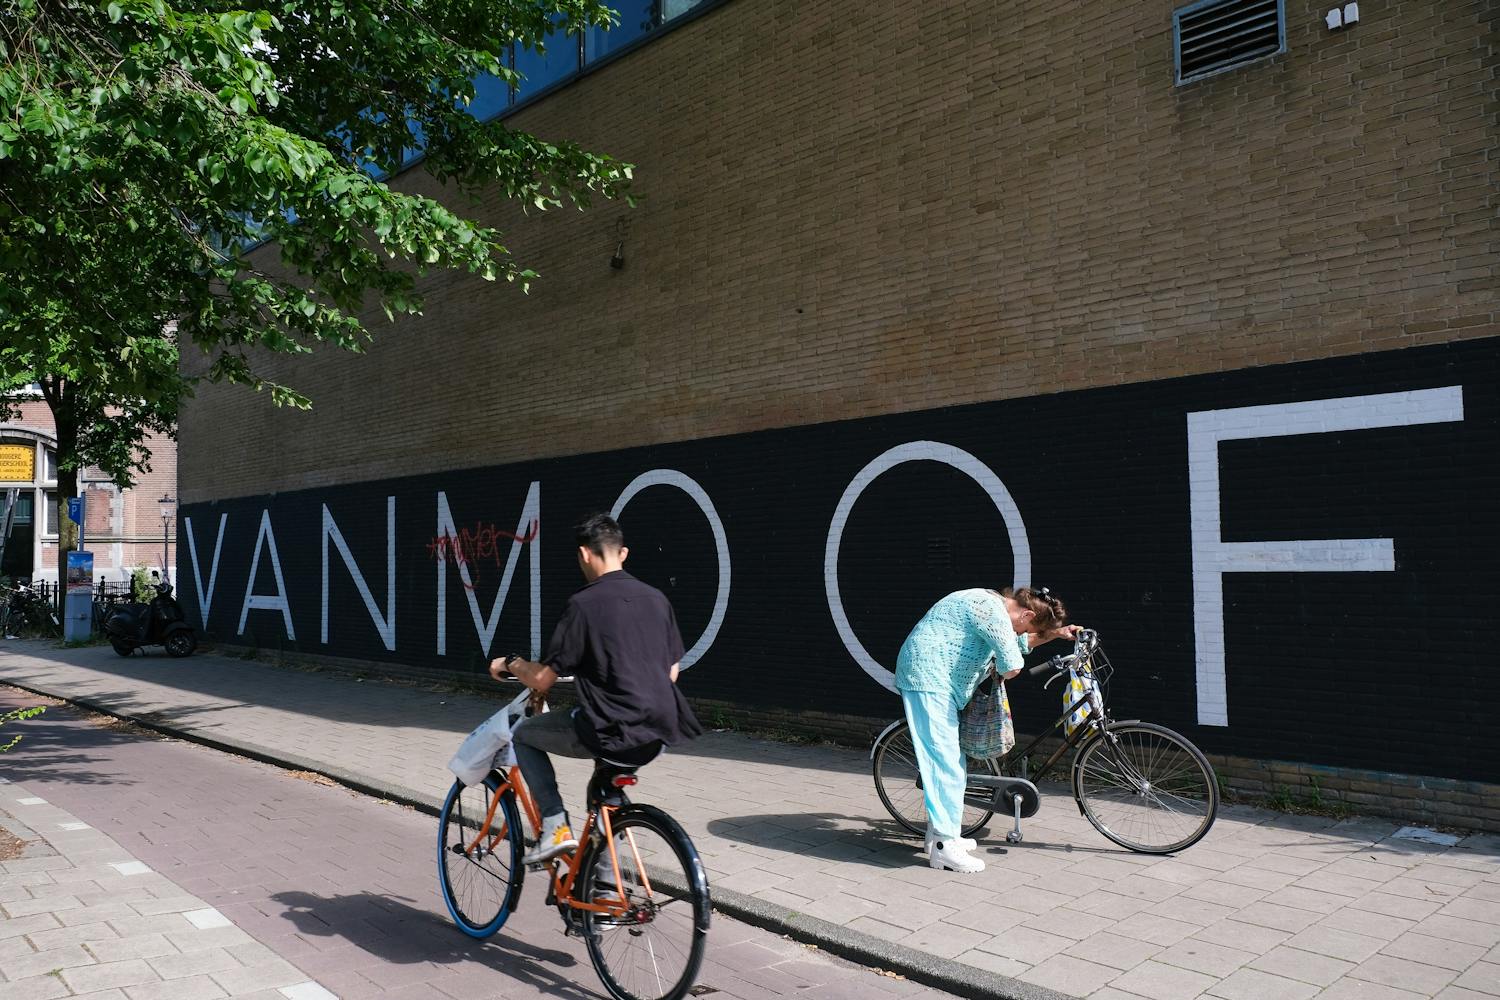 No ‘soft landing’ for VanMoof, but for economics